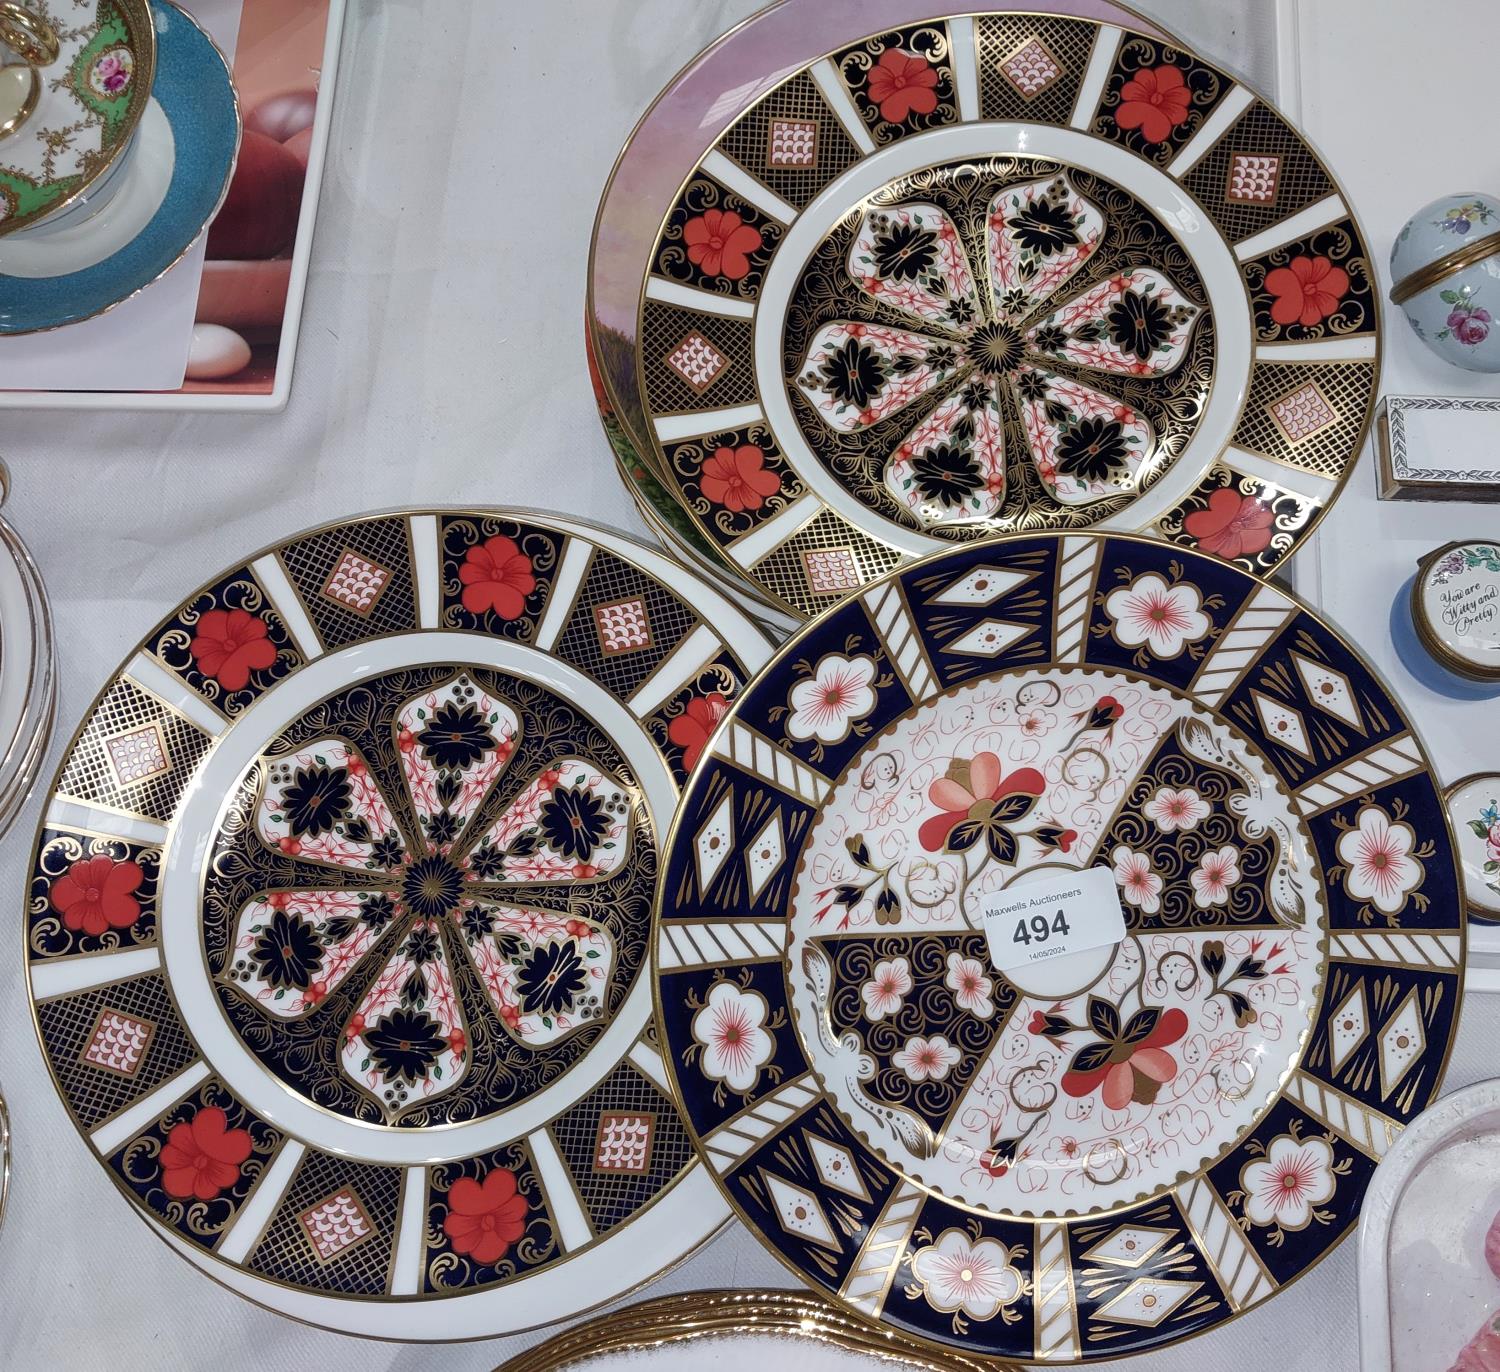 3 Royal Crown Derby Imari pattern plates, a collection of cake plates, Christmas Yule plates etc - Image 2 of 2